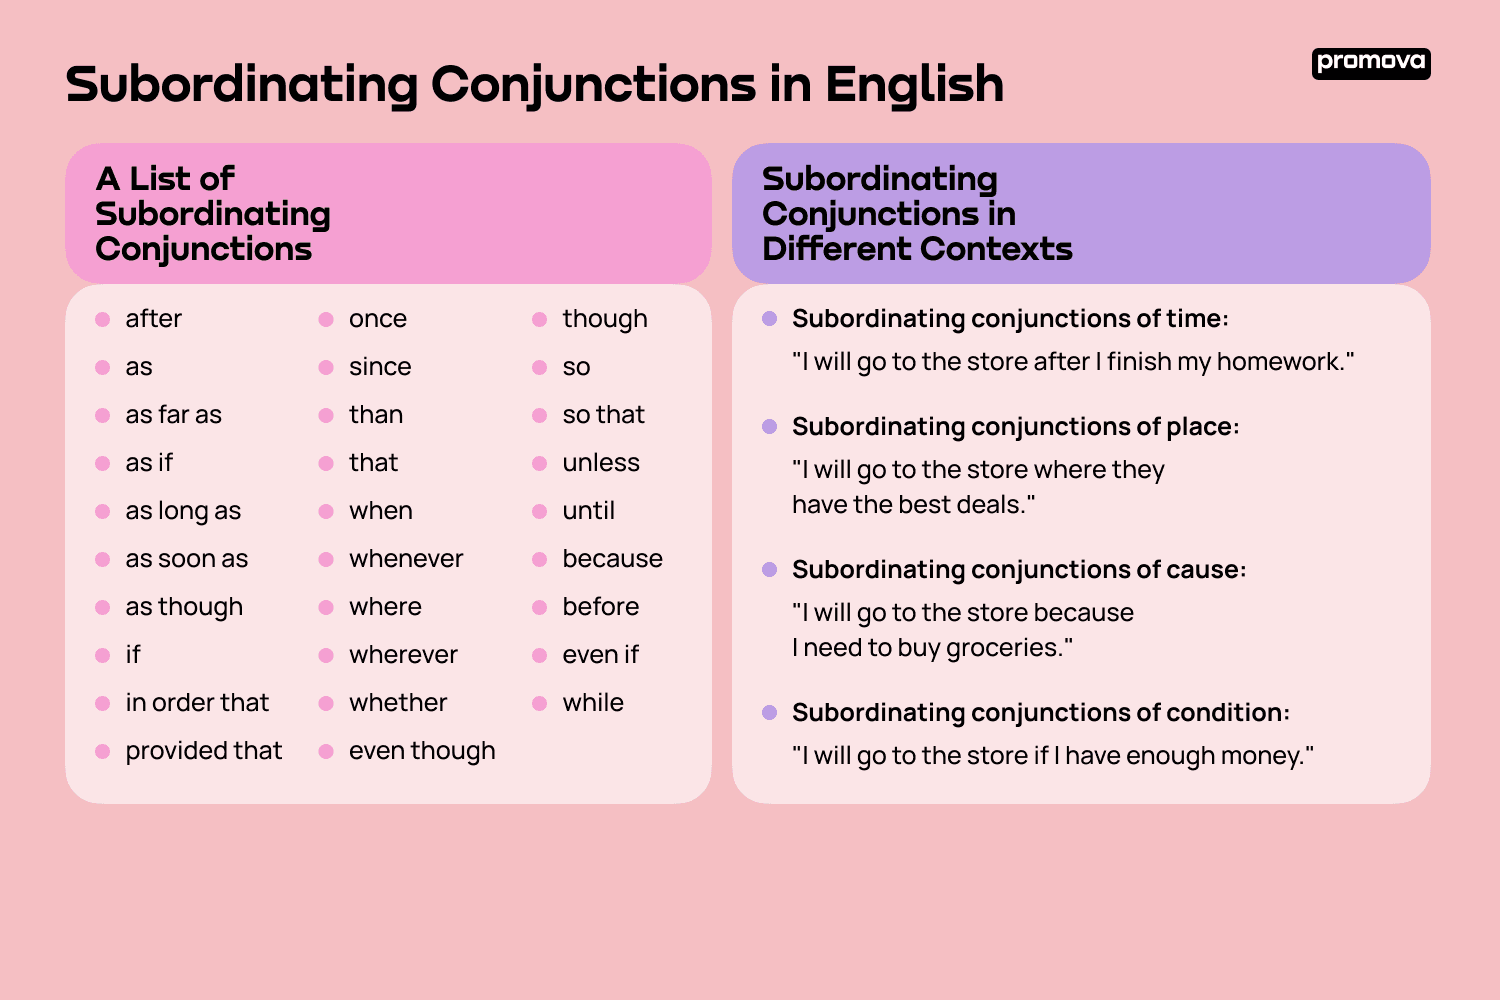 A List of Subordinating Conjunctions